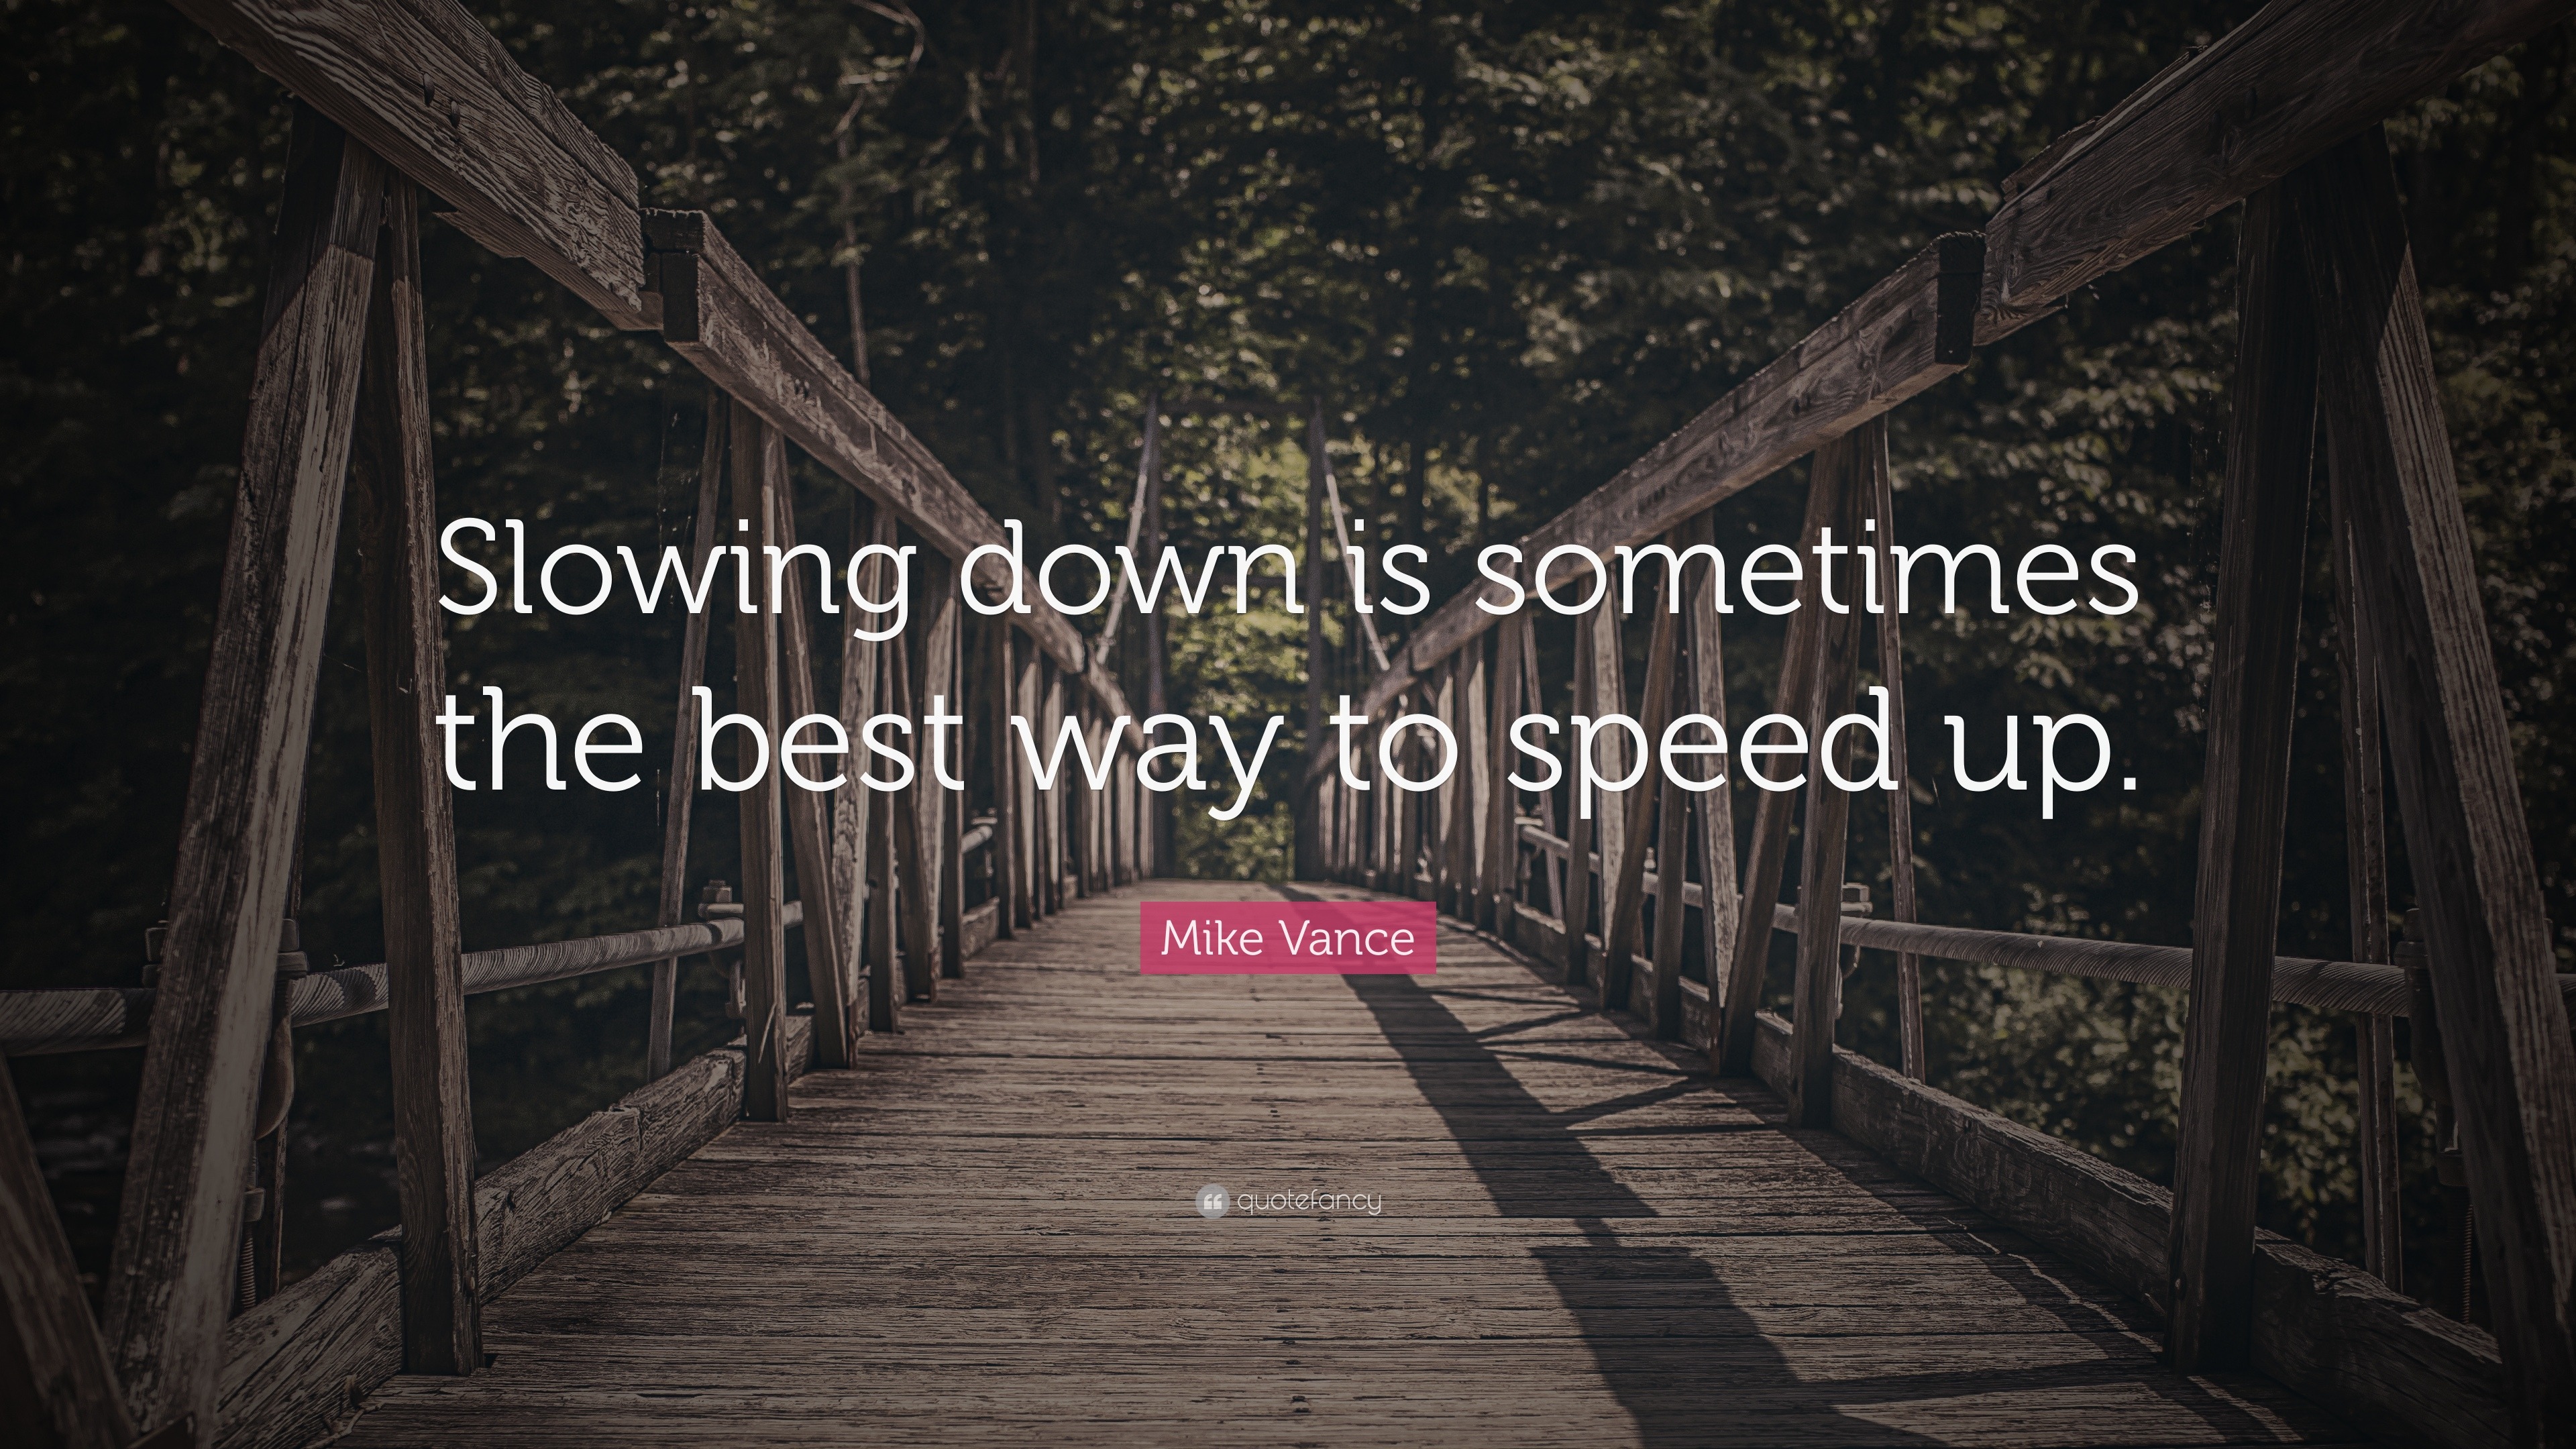 Mike Vance Quote: “Slowing down is sometimes the best way to speed